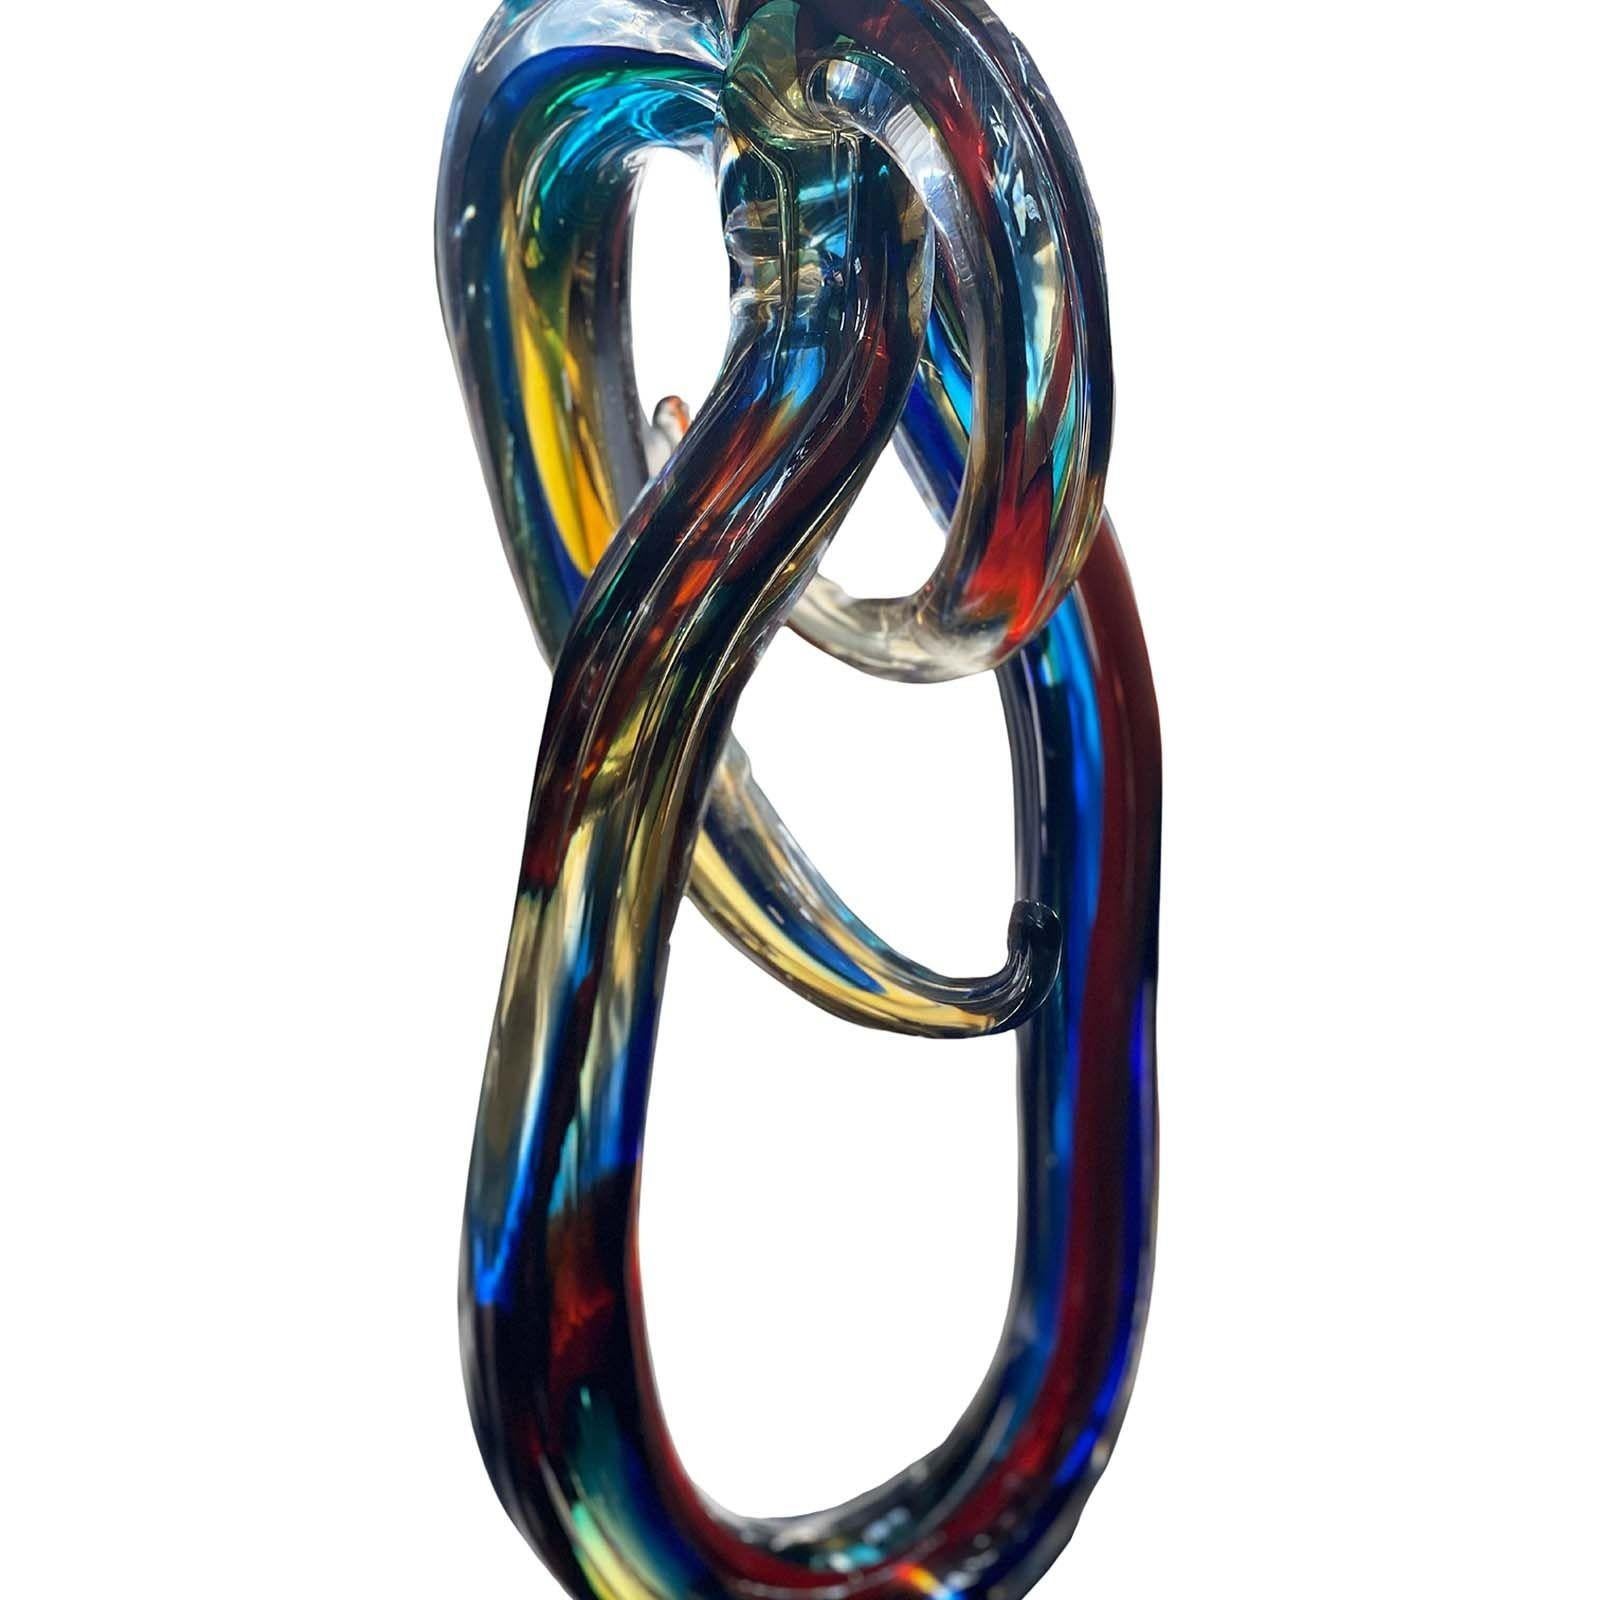 Abstract Murano Glass multicolor sculpture on a black glass vase by Sergio Costantini (signed) Made in Italy, 20th century.
Dimensions:
22